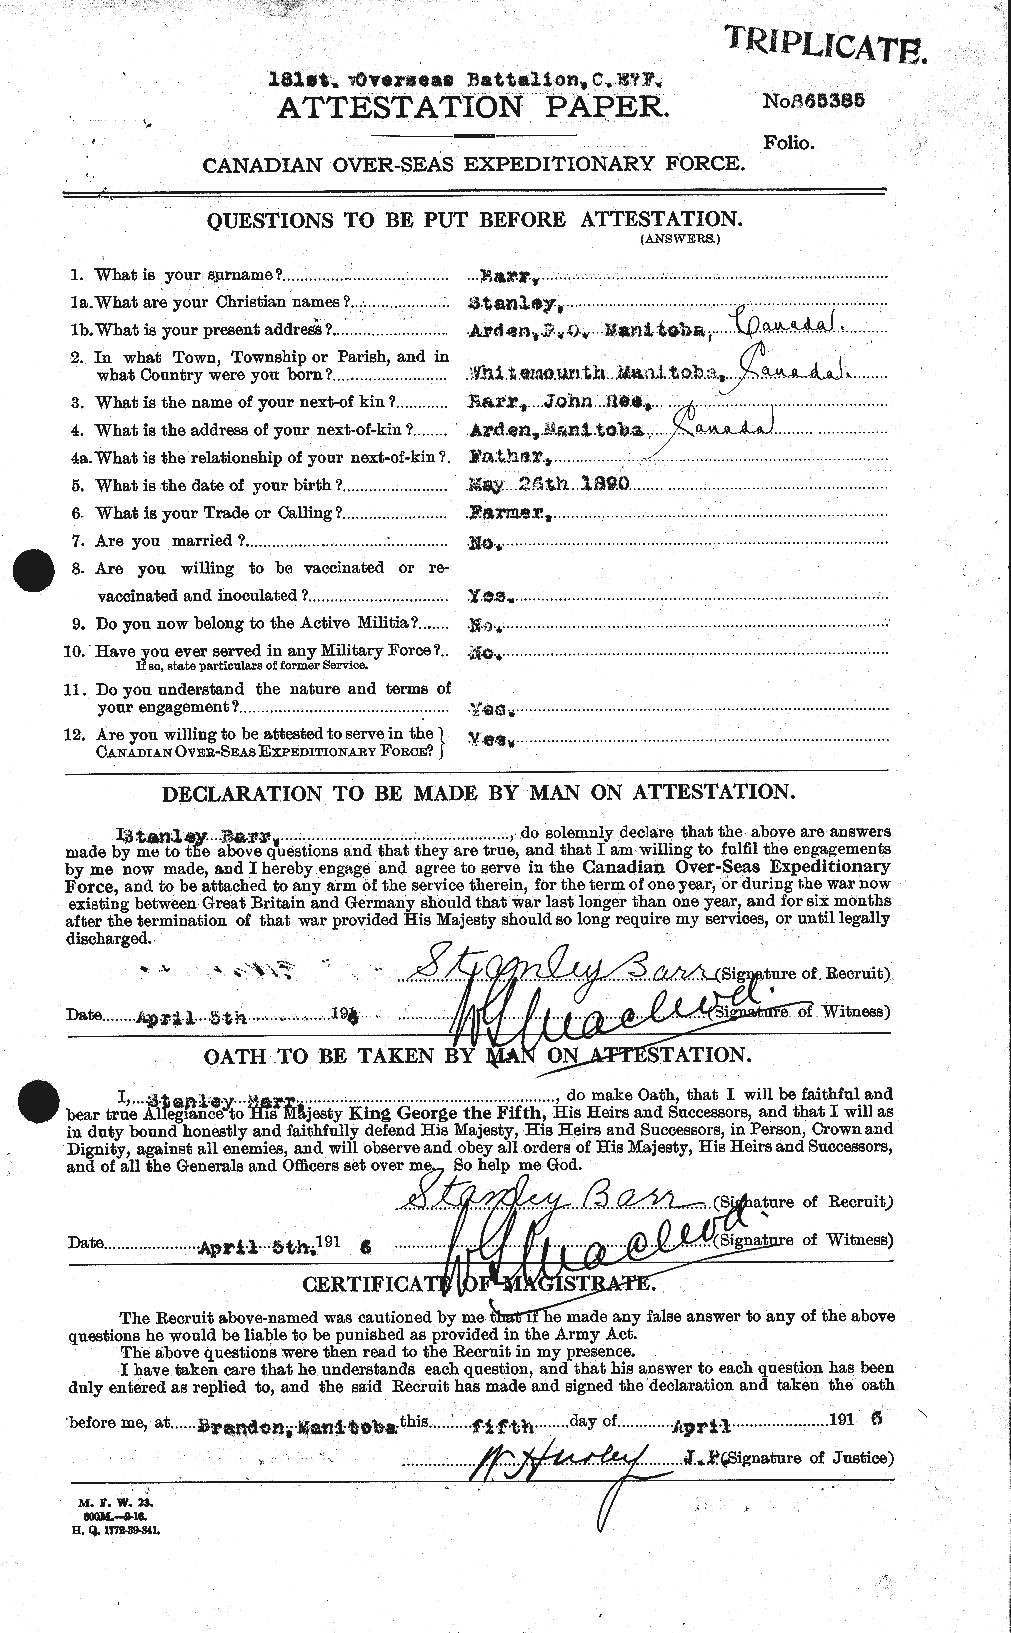 Personnel Records of the First World War - CEF 221736a